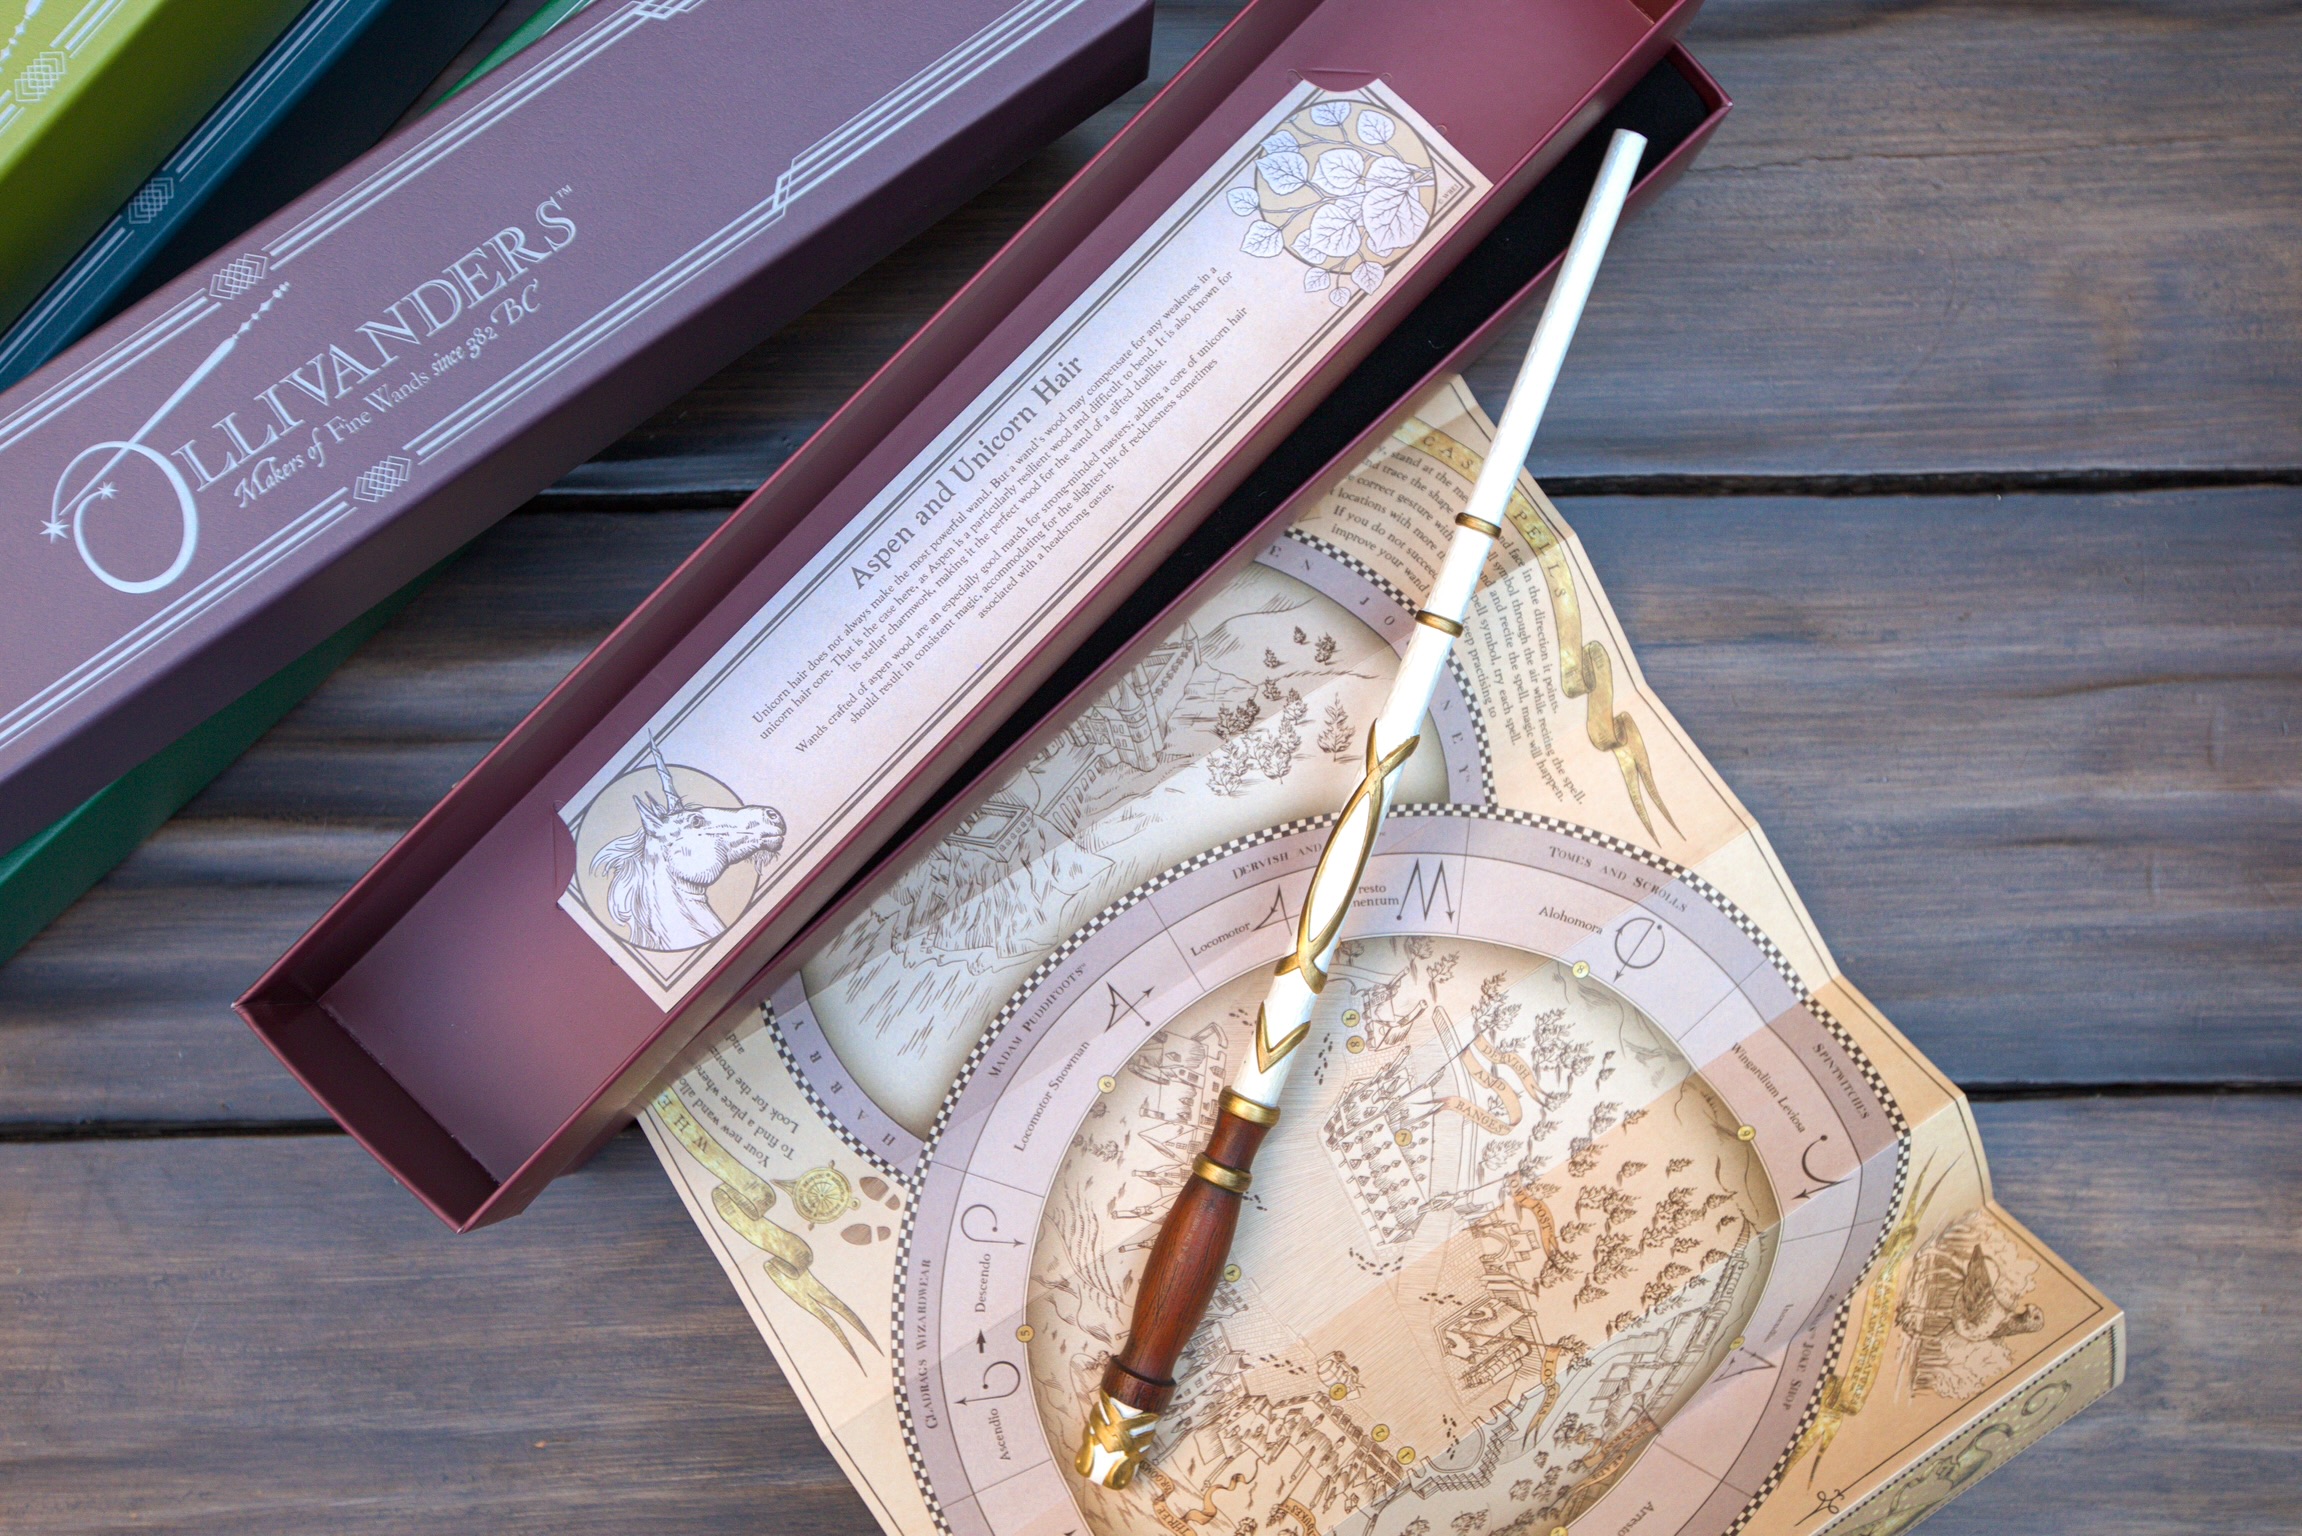 New Collection of Wizarding World of Harry Potter Interactive Wands debuts  at Universal Parks | Inside Universal